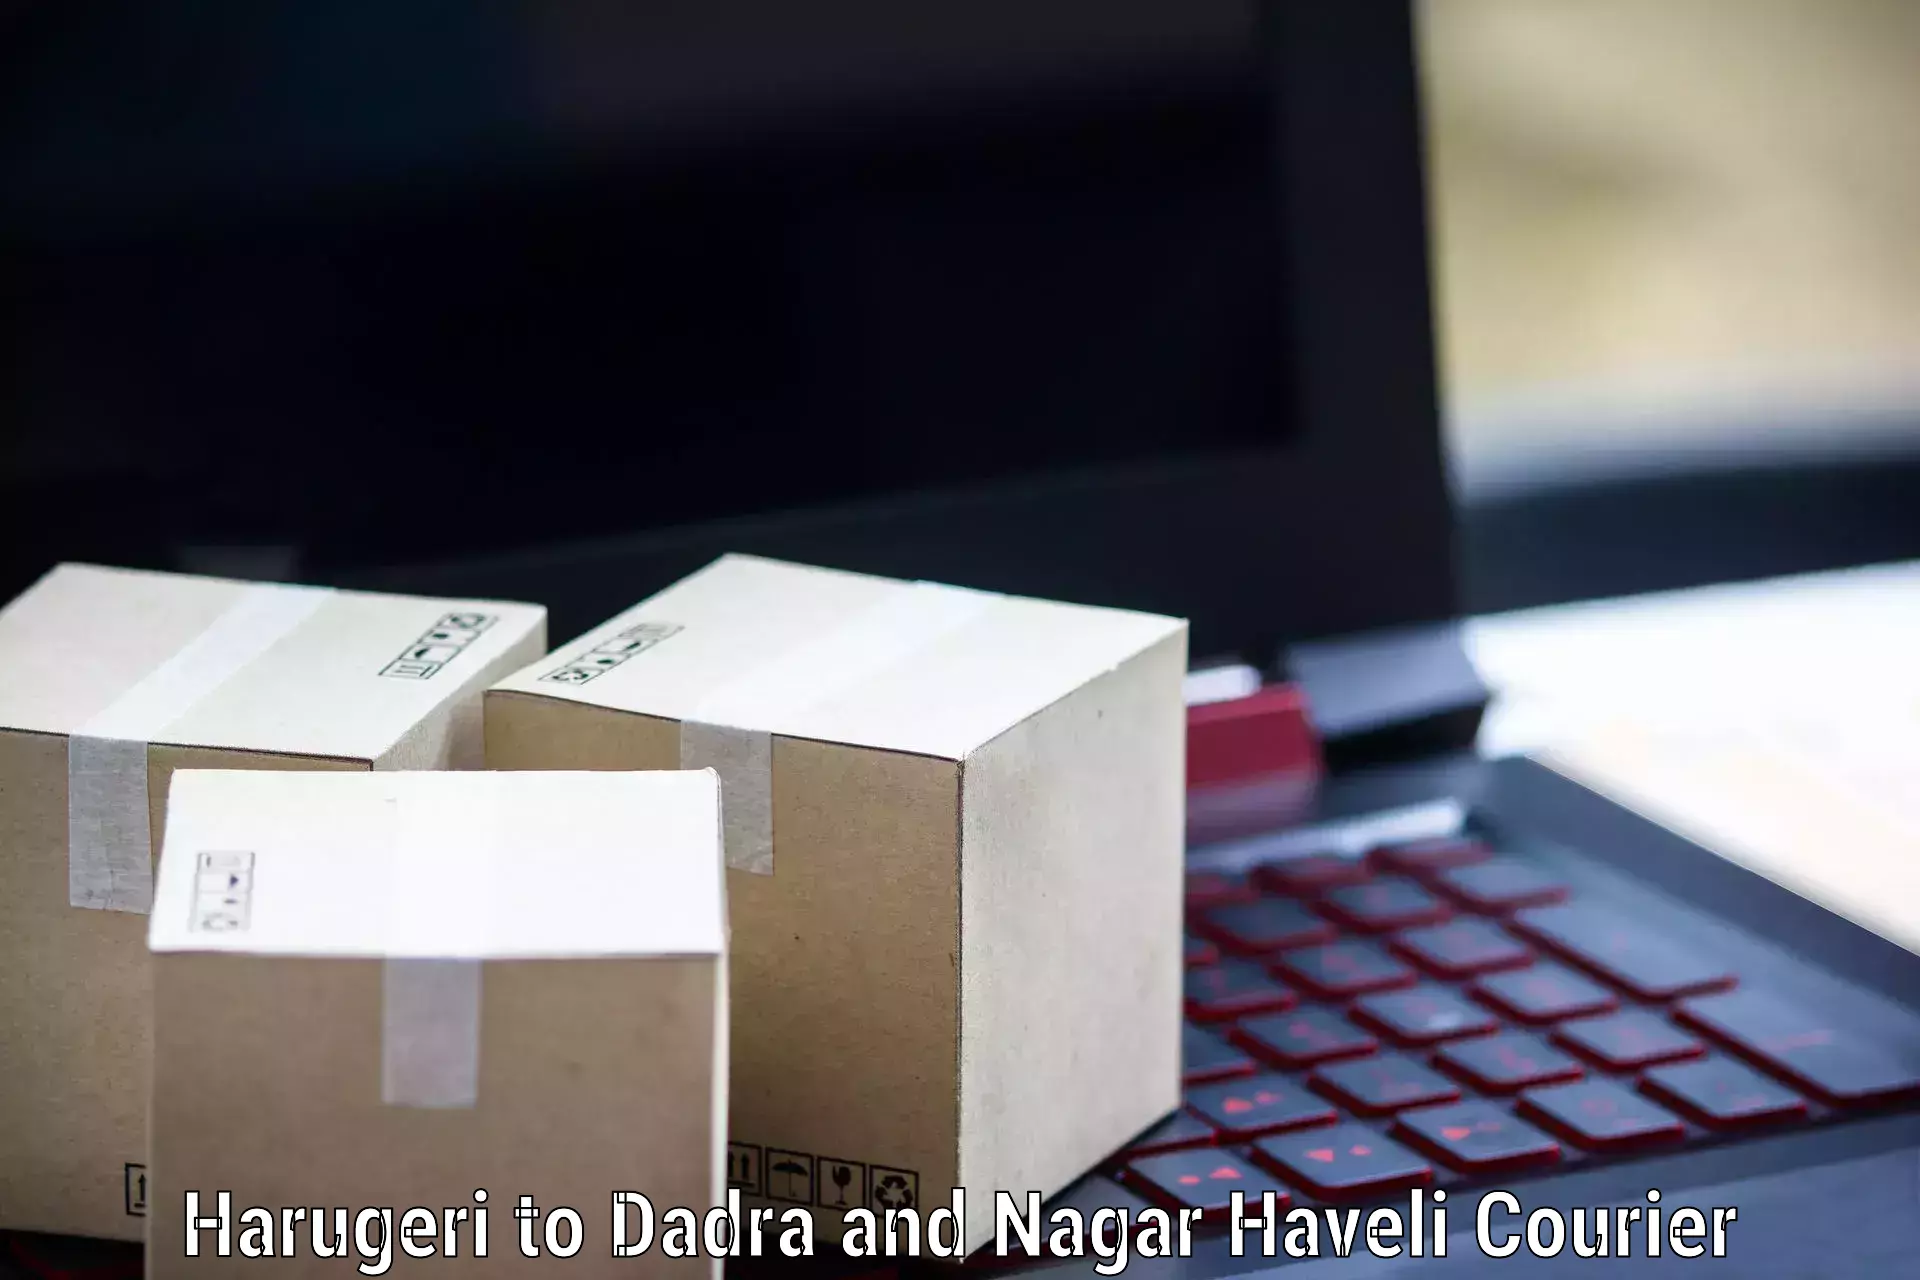 Custom courier packages Harugeri to Dadra and Nagar Haveli